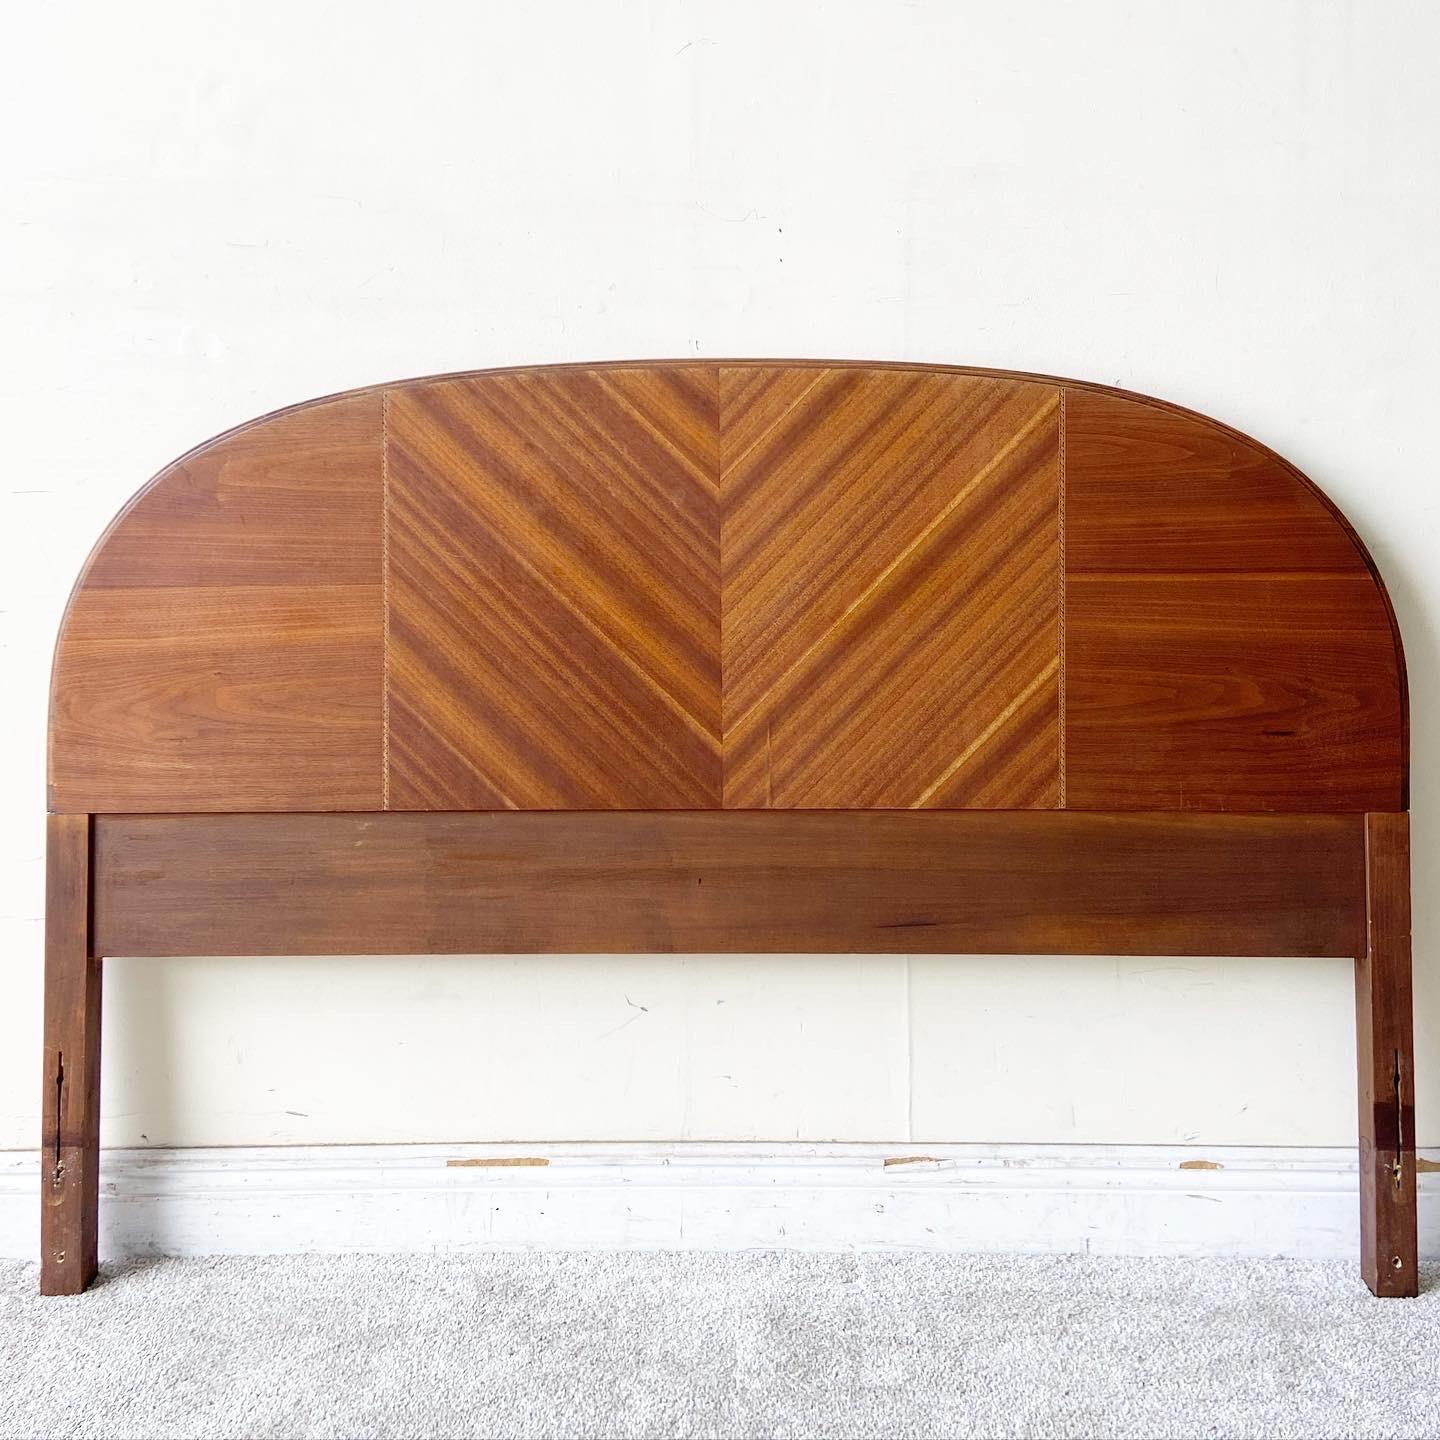 Amazing Art Deco full size wooden headboard with footboard. Each feature fantastically finished veneers.
